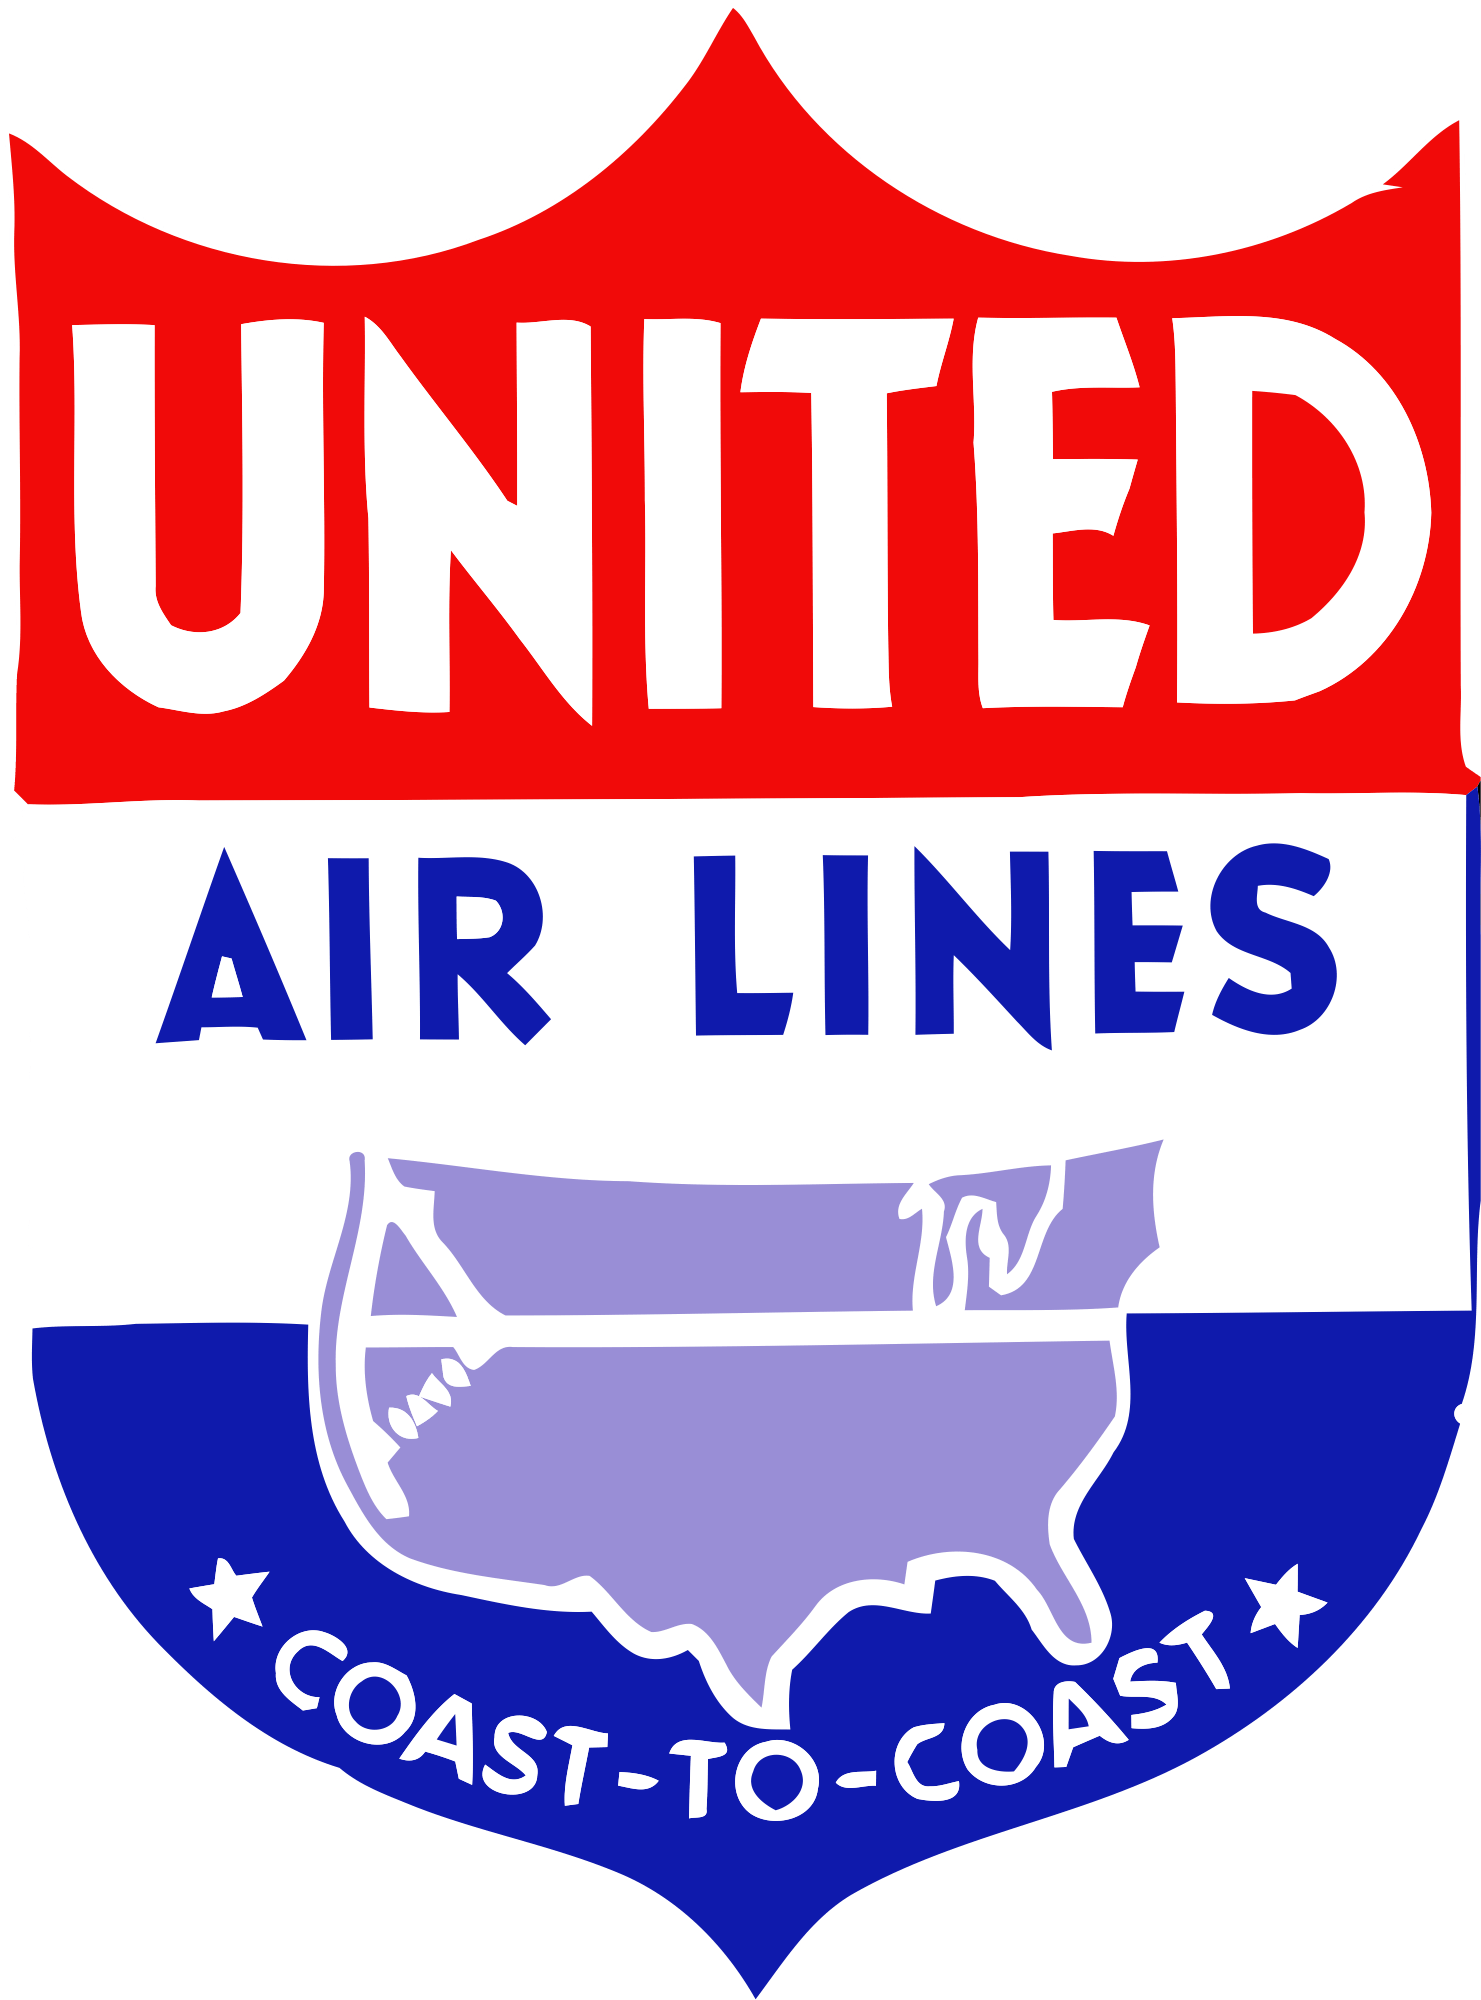 Red and Blue Airline Logo - United Airlines | Logopedia | FANDOM powered by Wikia